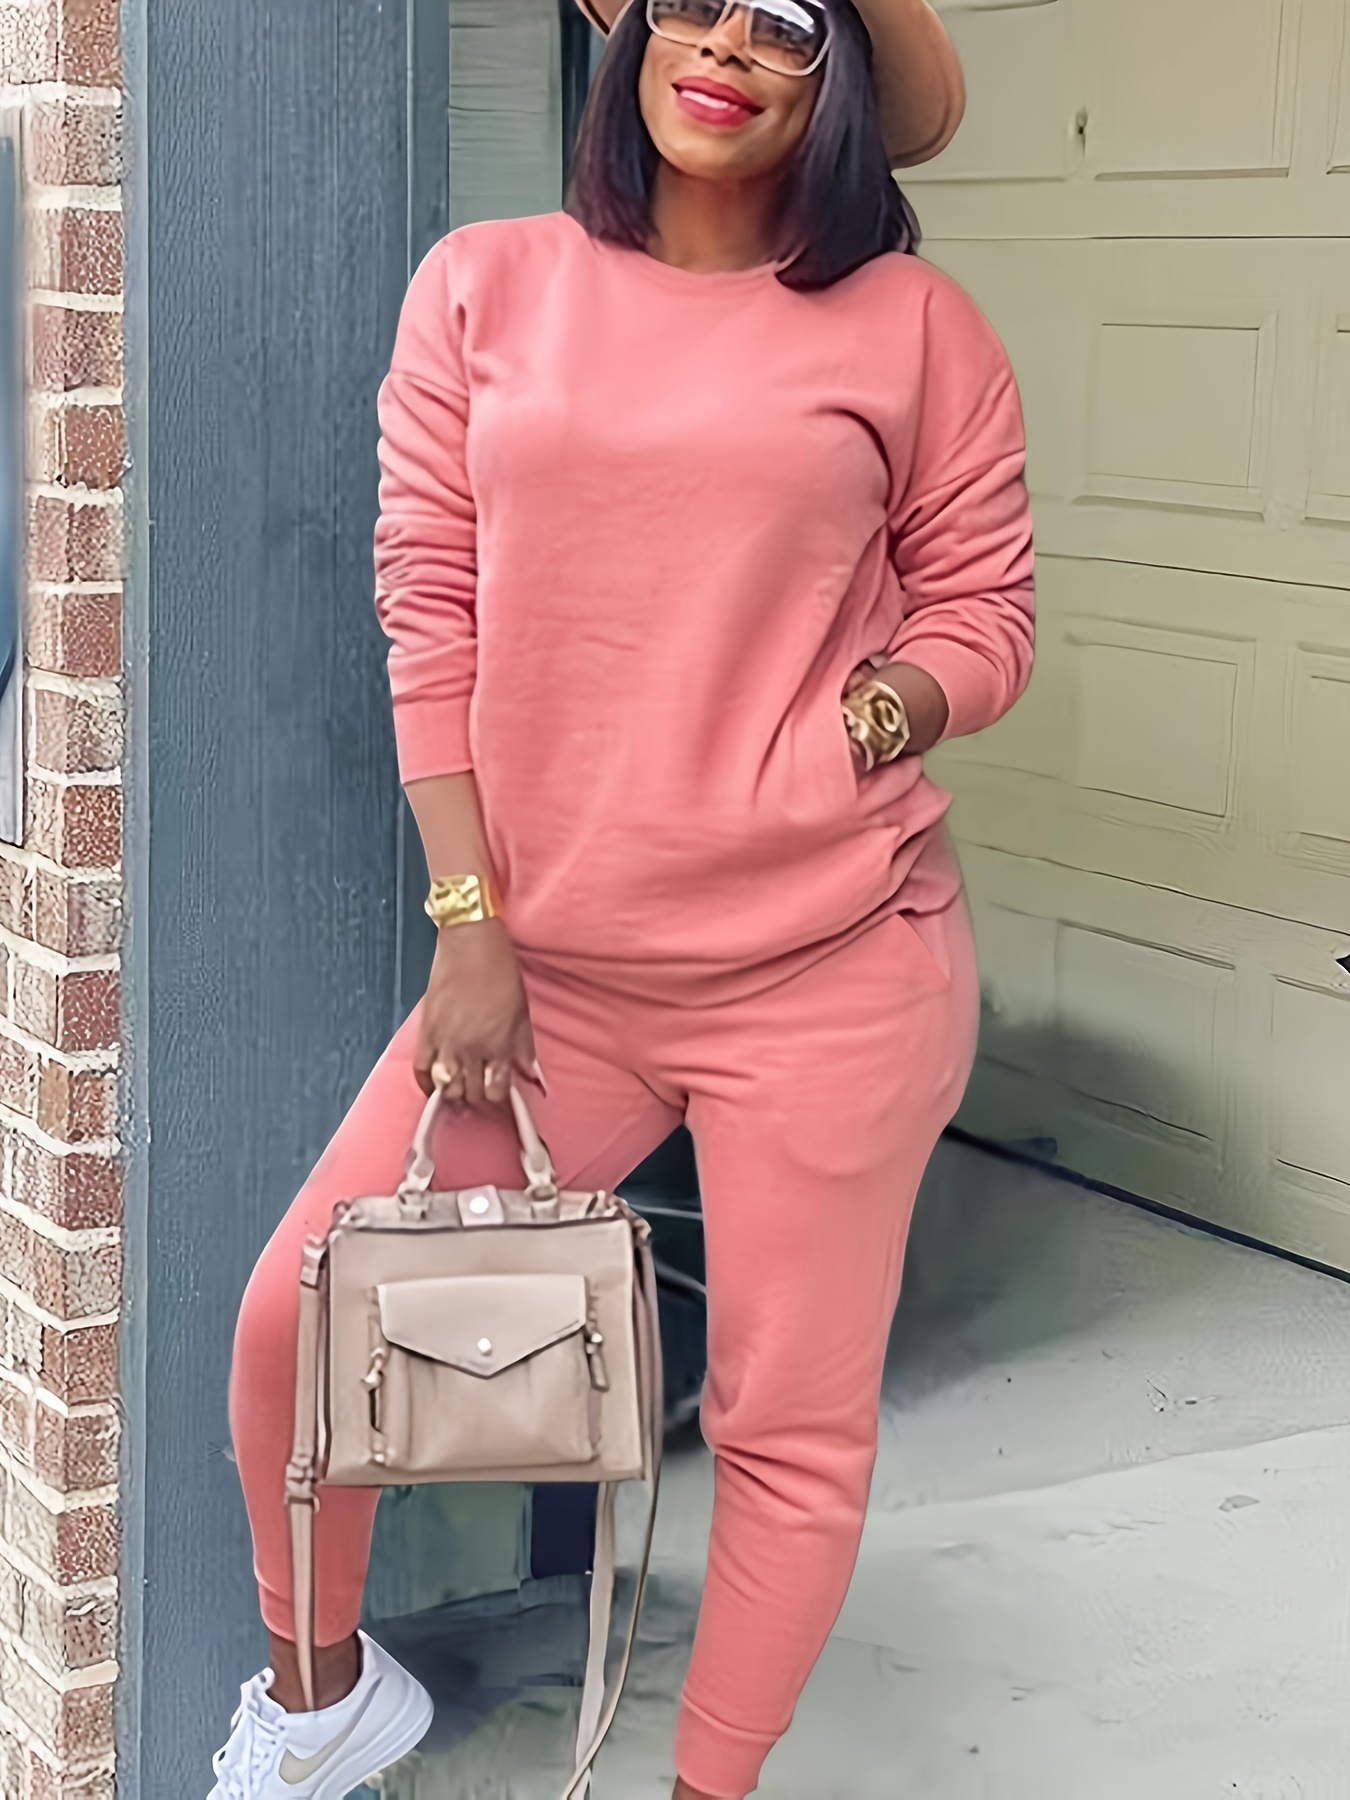 Mother's Day POROPL Jogger Sets for Women 2 Piece Spring Hot Pink Crew Neck  Solid Color Off Shoulder Long Sleeve Cable Knitted Warm Long Pants Sweater